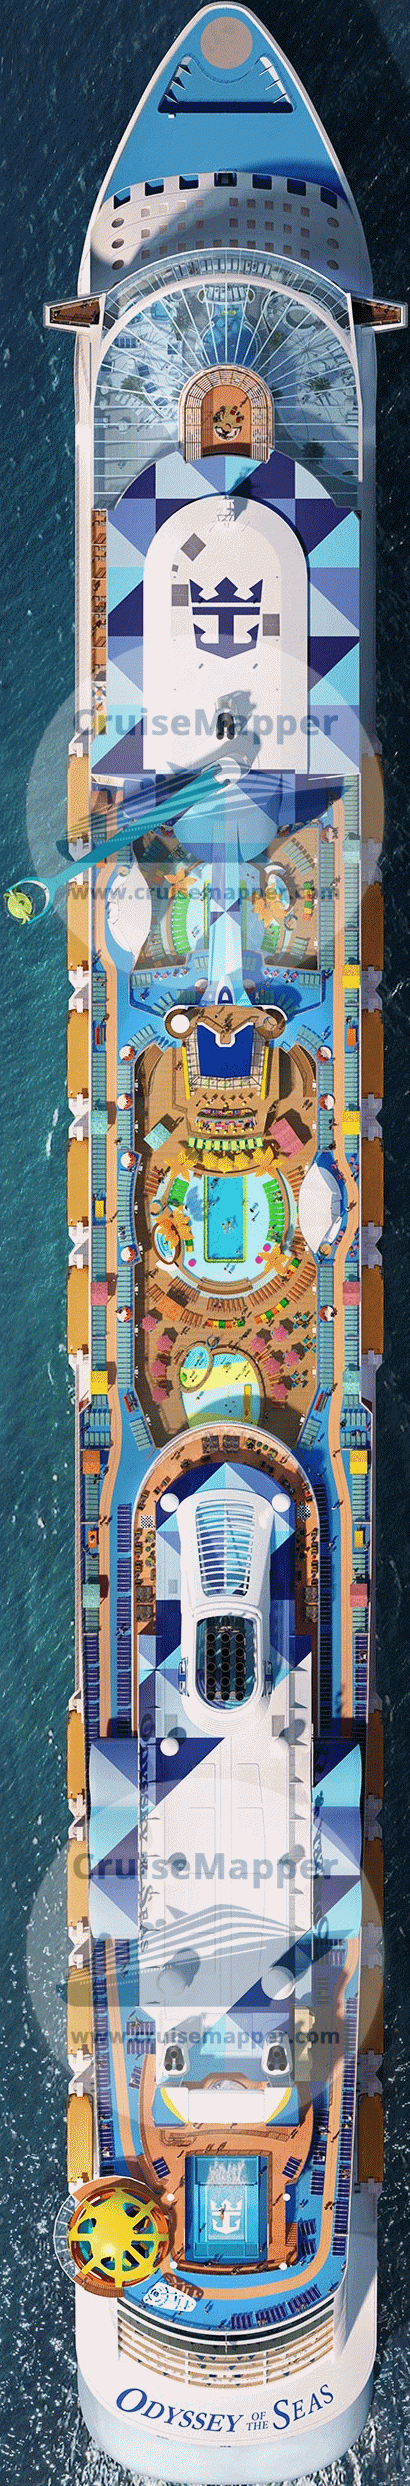 Odyssey Of The Seas Deck 17 - Topdeck-Aerial View